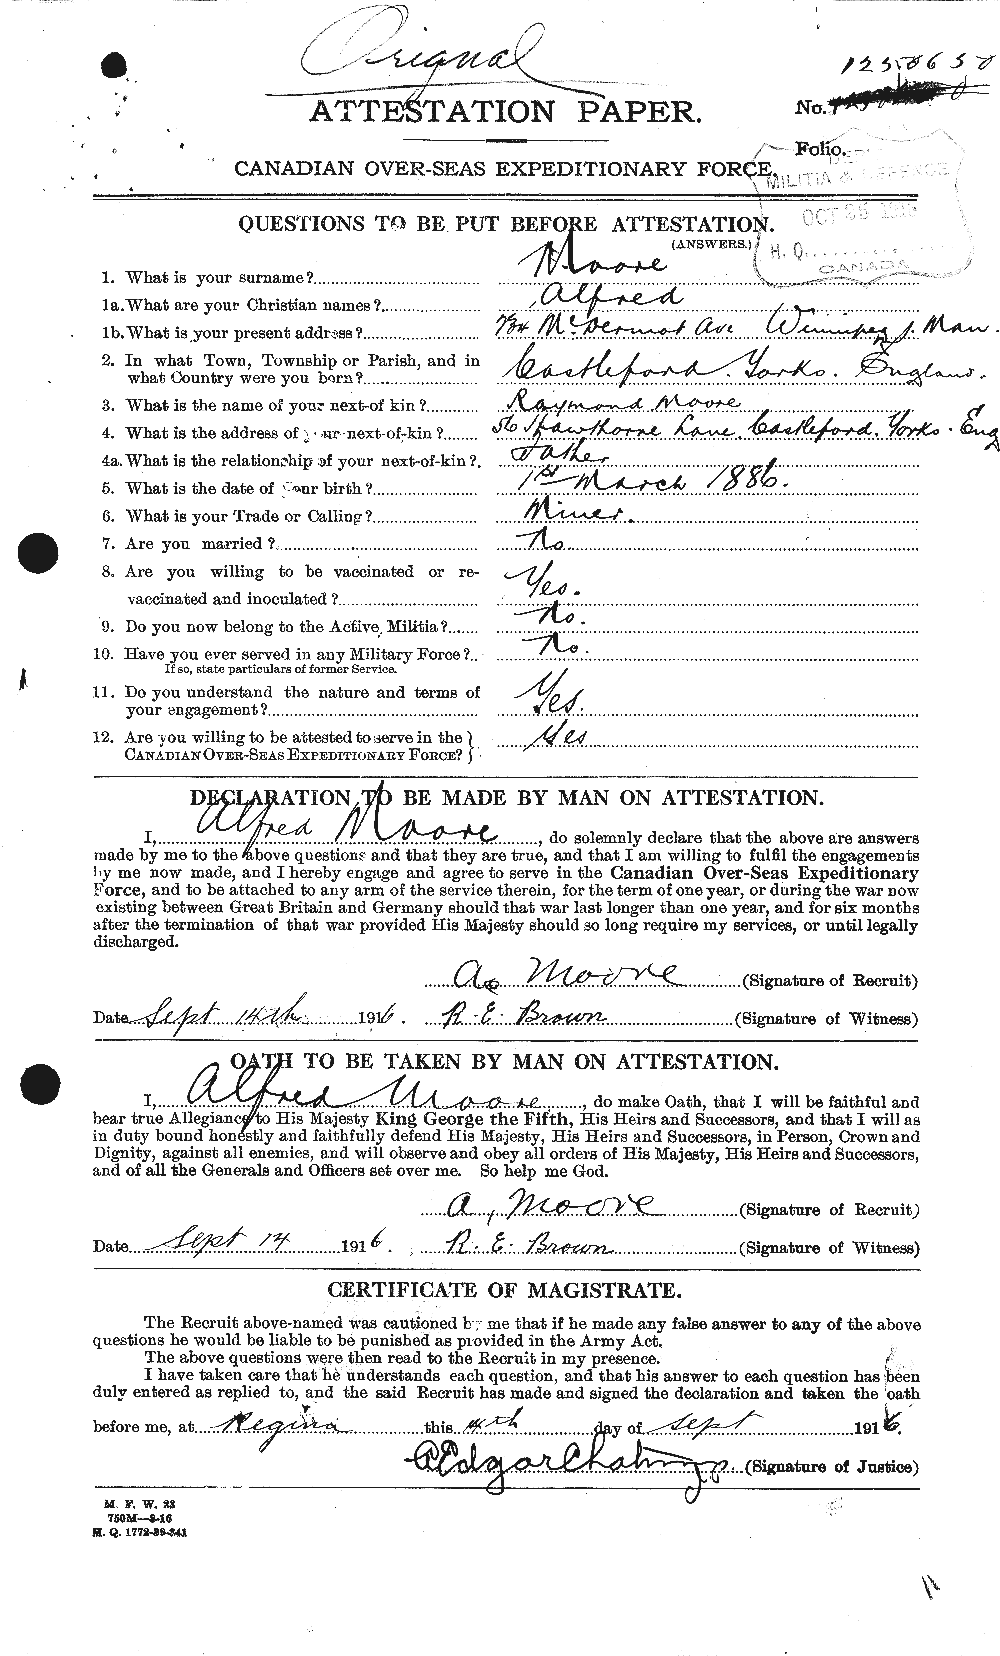 Personnel Records of the First World War - CEF 506376a